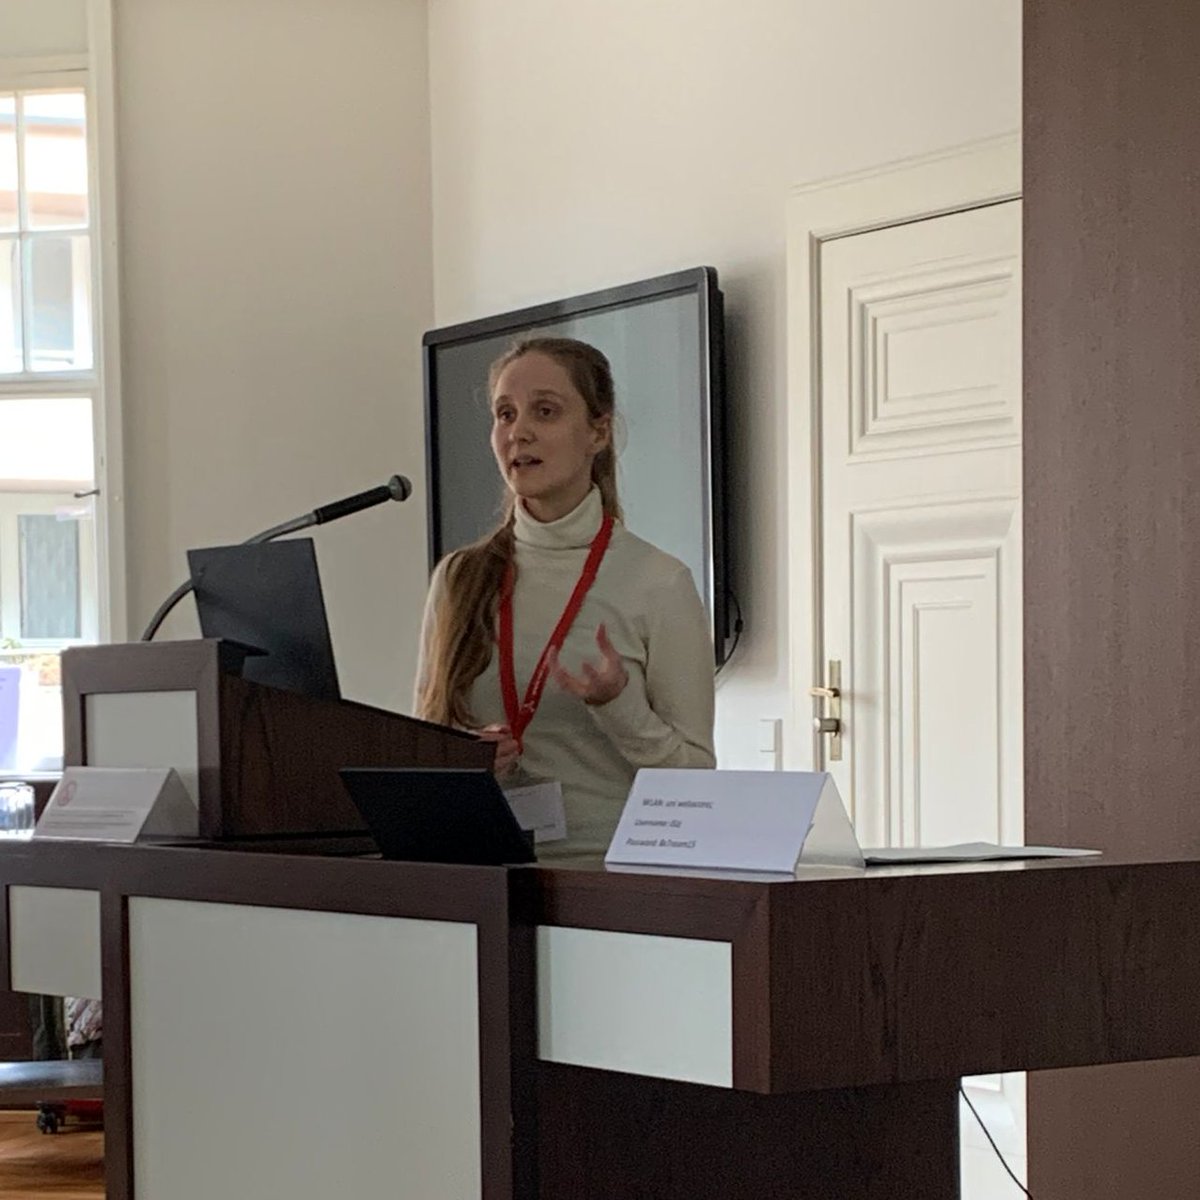 Some impressions of Day 2 of our NEW_LIVES-conference. 🧬👶 This morning with talks by Hannah Straub, @Mahsashabani and Karla Alex in the beautiful International Academic Forum Heidelberg @UniHeidelberg